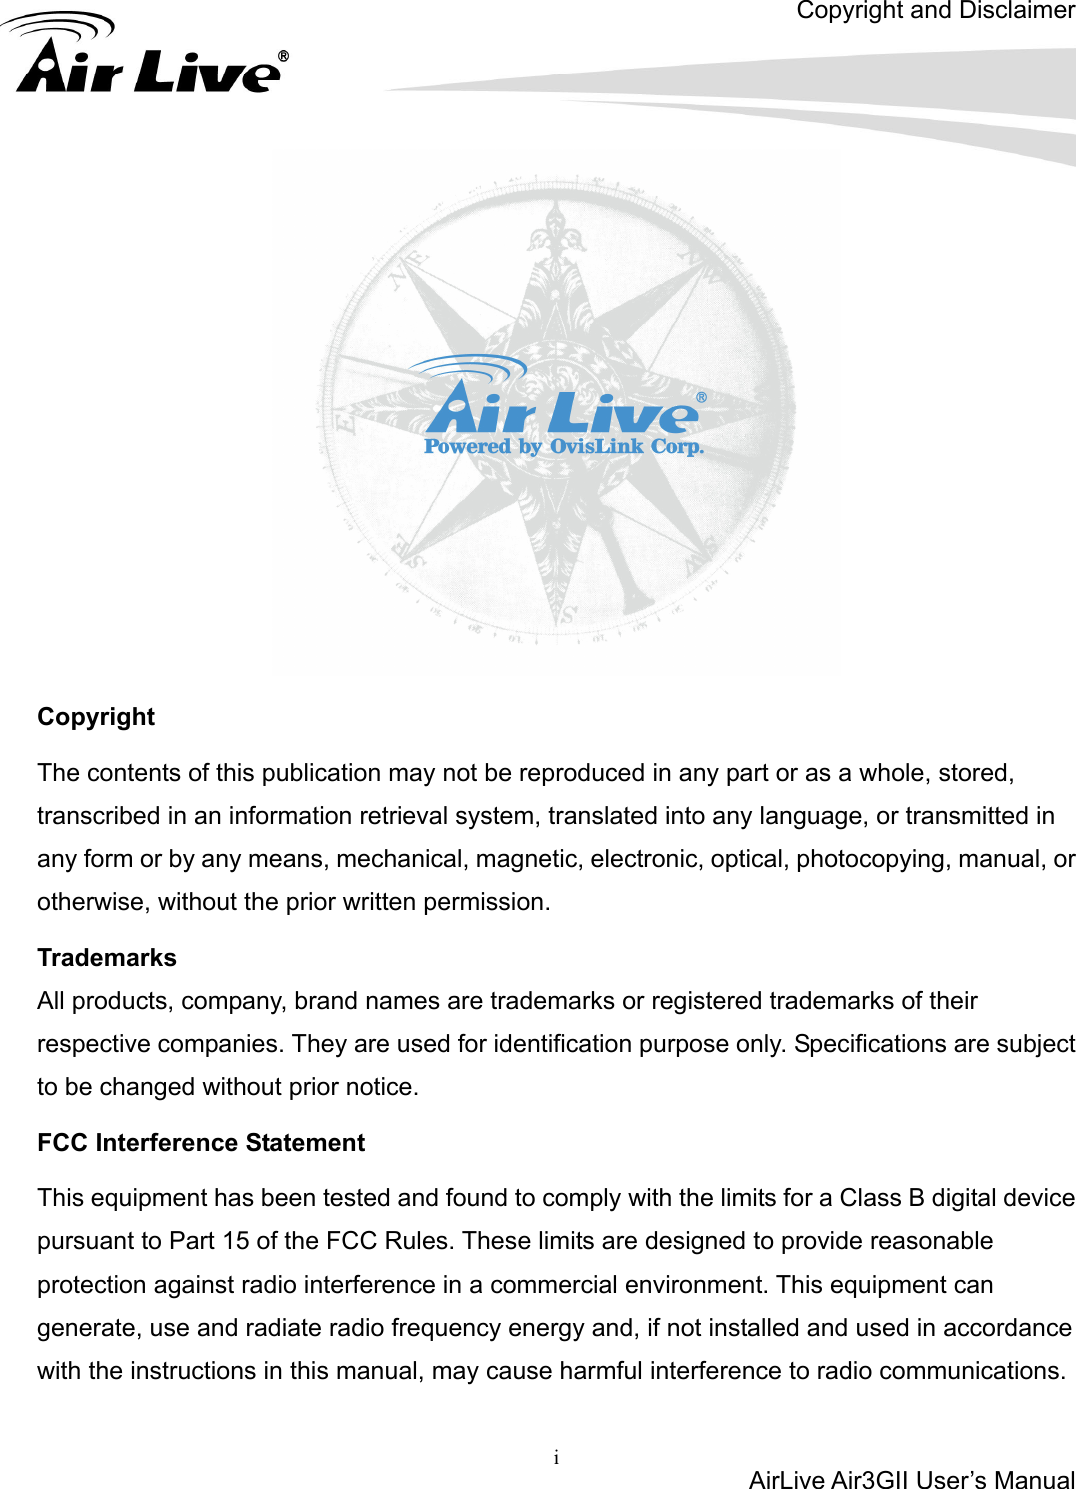 Copyright and Disclaimer AirLive Air3GII User’s Manual  i        Copyright The contents of this publication may not be reproduced in any part or as a whole, stored, transcribed in an information retrieval system, translated into any language, or transmitted in any form or by any means, mechanical, magnetic, electronic, optical, photocopying, manual, or otherwise, without the prior written permission. Trademarks All products, company, brand names are trademarks or registered trademarks of their respective companies. They are used for identification purpose only. Specifications are subject to be changed without prior notice. FCC Interference Statement This equipment has been tested and found to comply with the limits for a Class B digital device pursuant to Part 15 of the FCC Rules. These limits are designed to provide reasonable protection against radio interference in a commercial environment. This equipment can generate, use and radiate radio frequency energy and, if not installed and used in accordance with the instructions in this manual, may cause harmful interference to radio communications.   